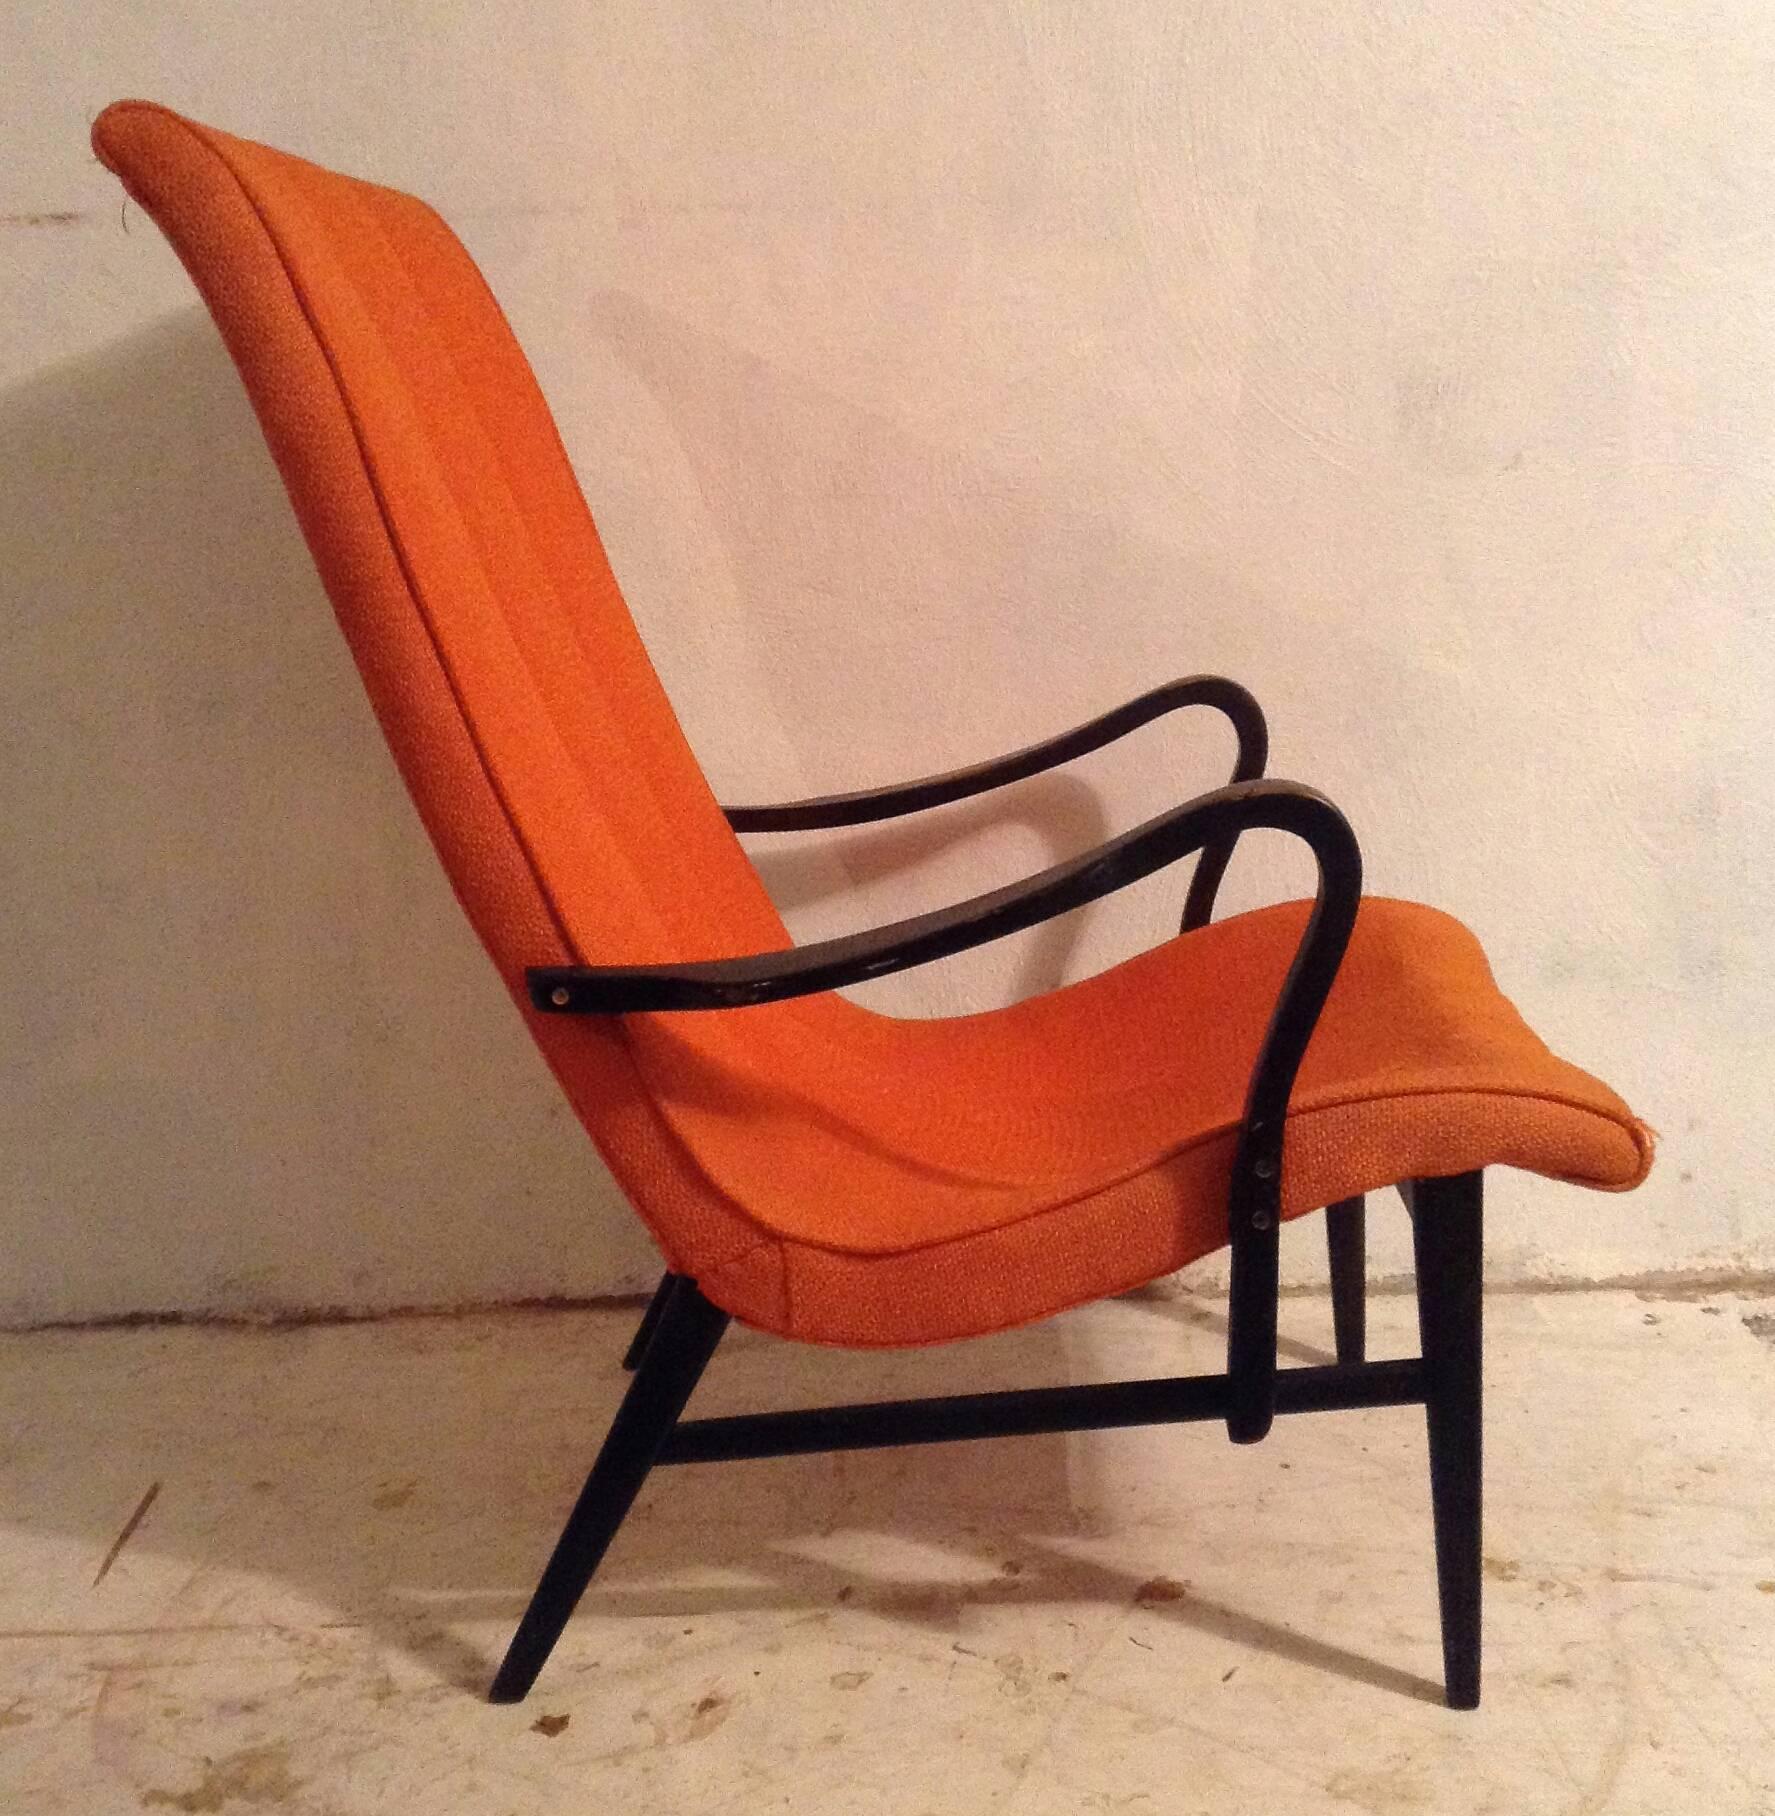 Lacquered Modernist High Back Lounge Chair, Made in Japan, Manner of Bruno Mathsson